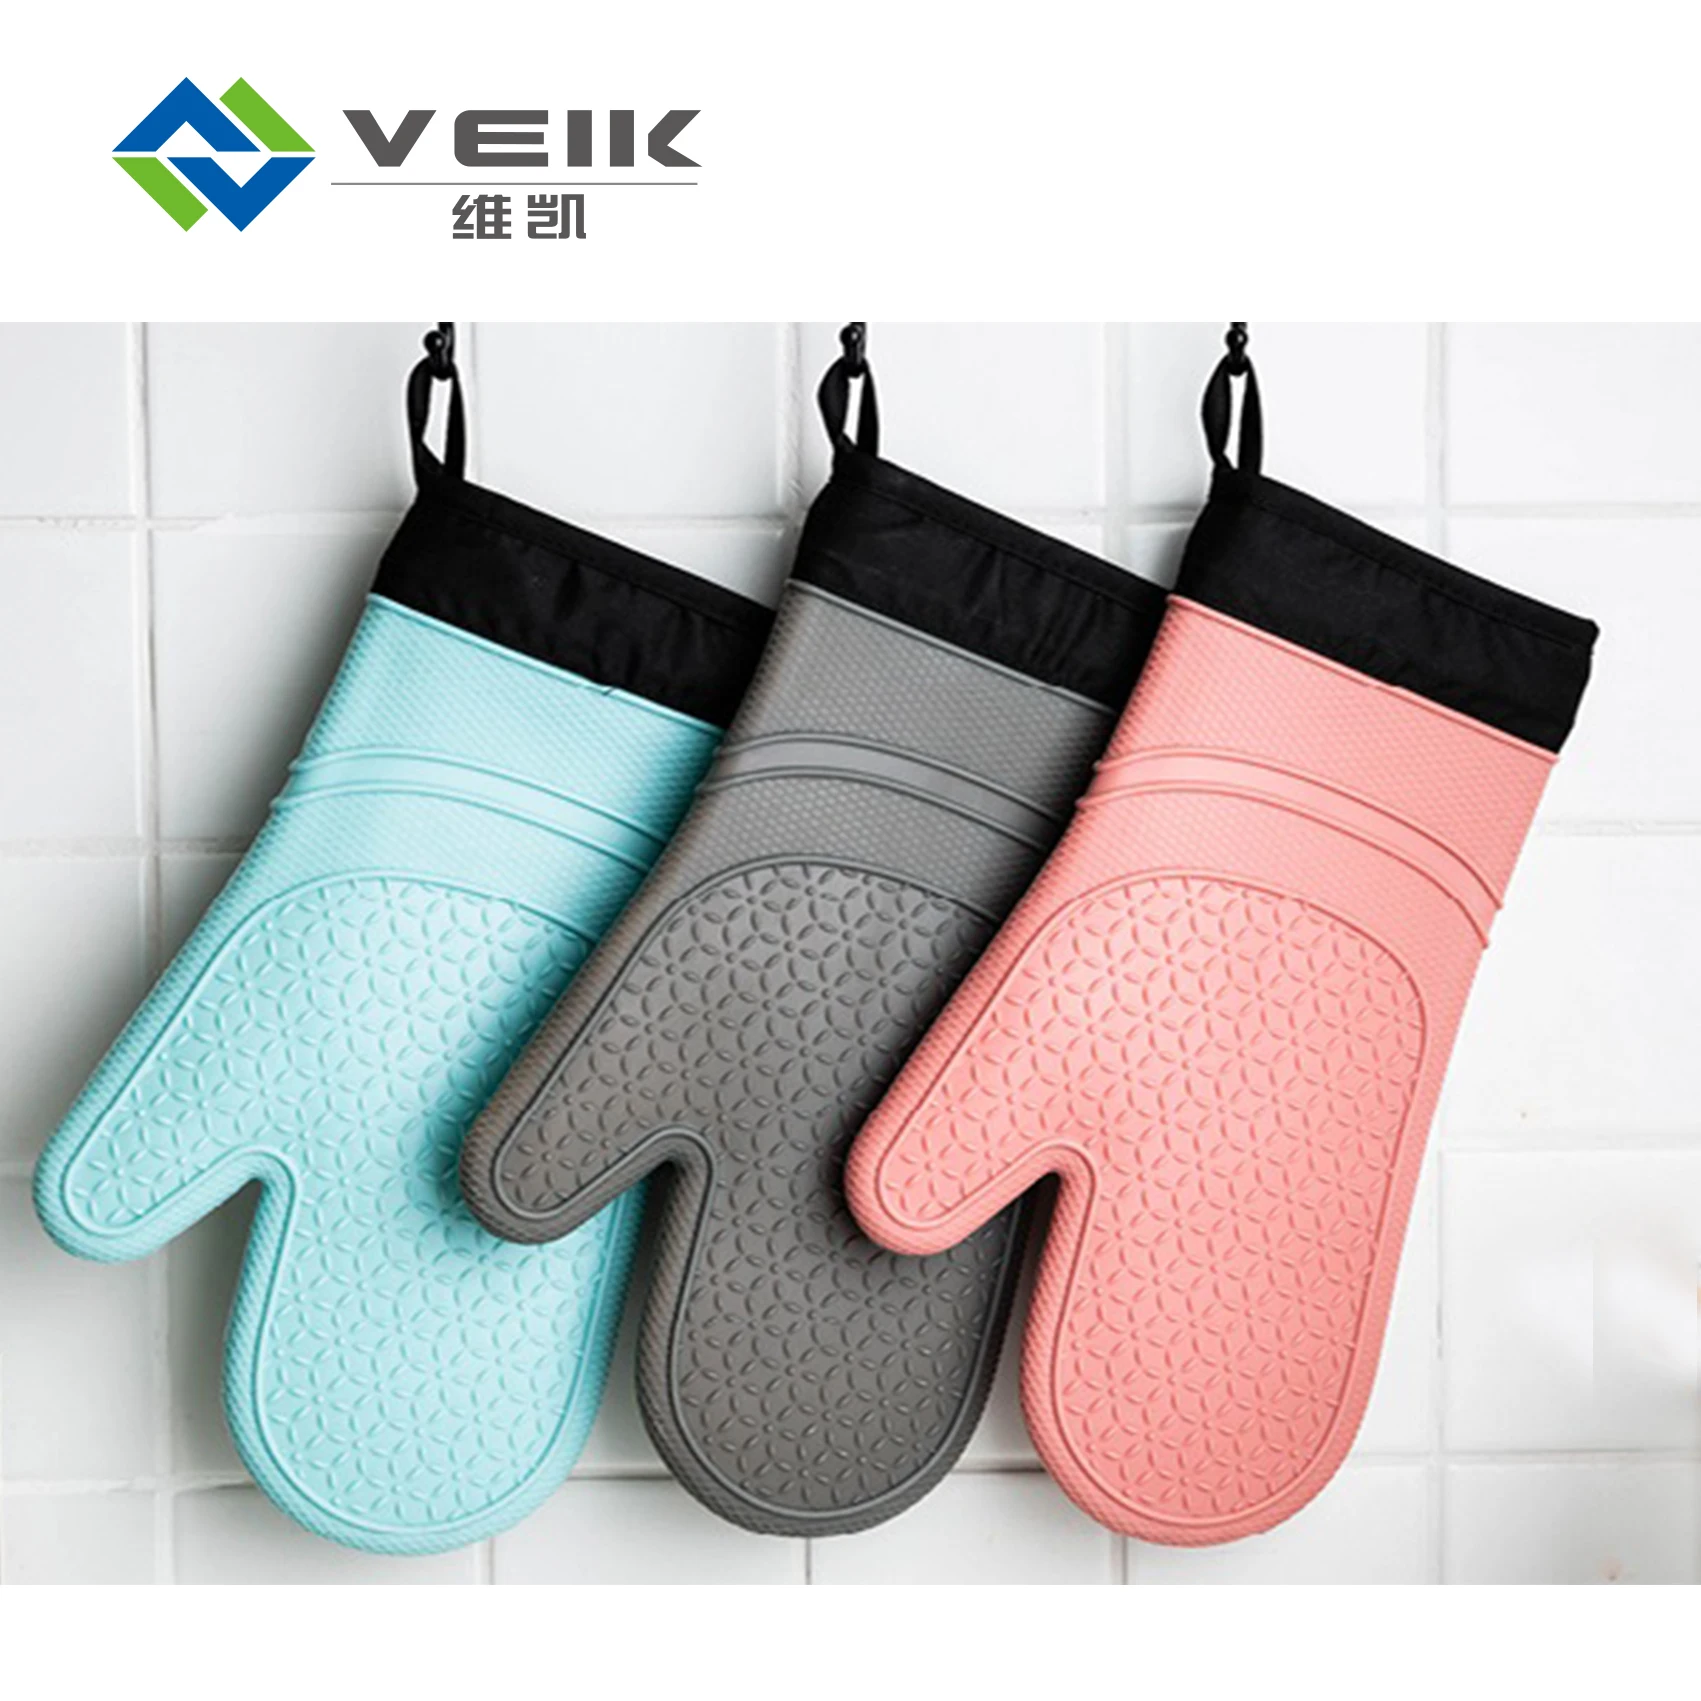 

Heat Resistant oven usage kitchen silicone glove with cotton lining inside, Custom color